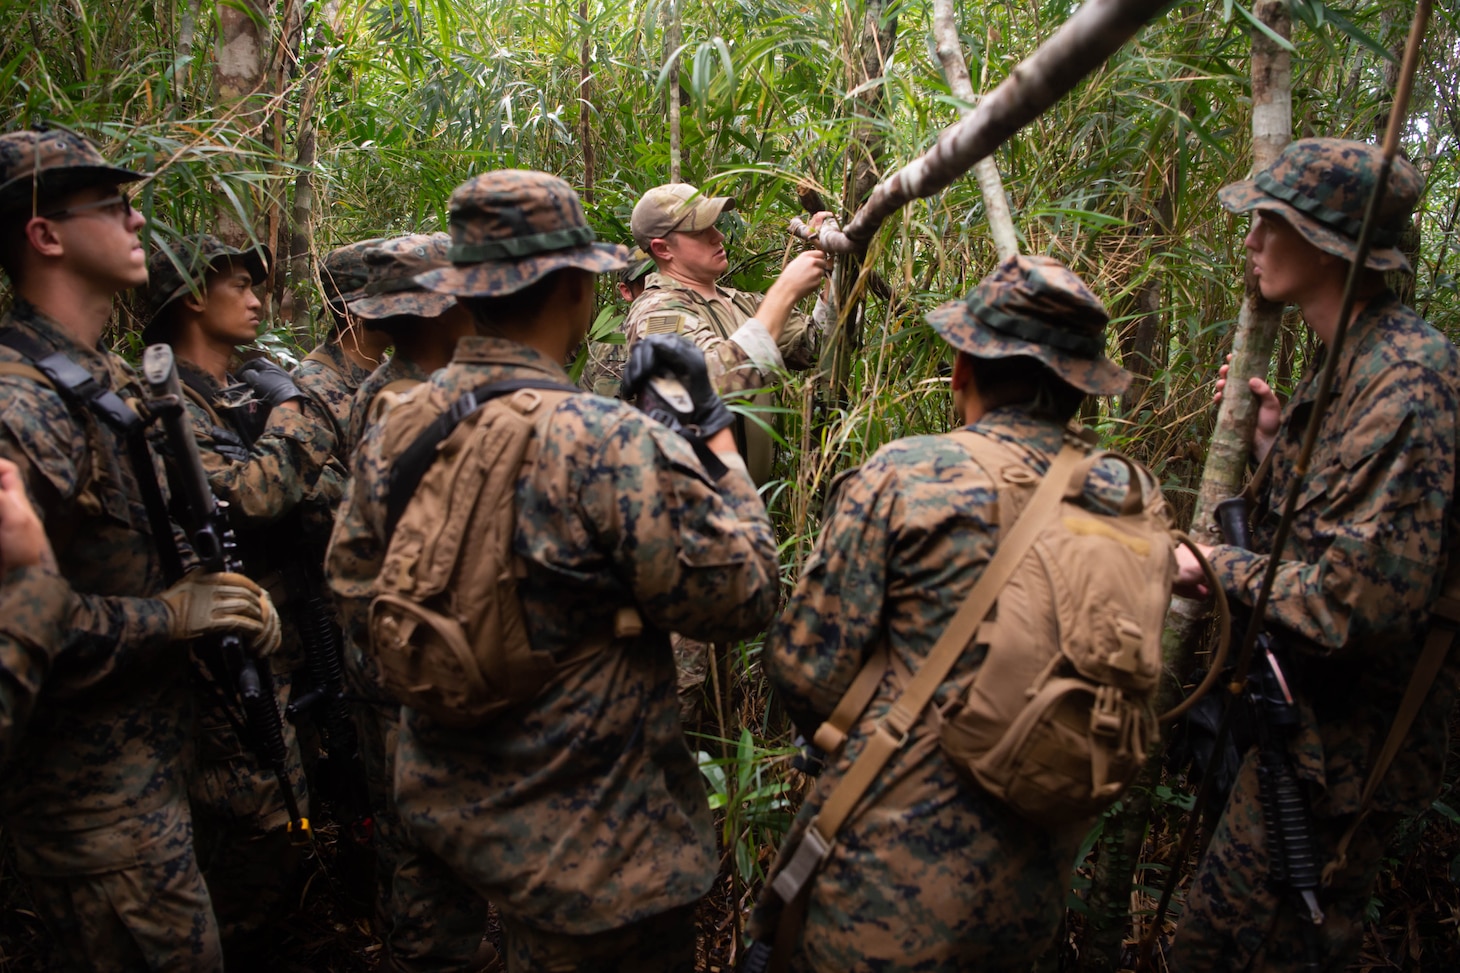 A group of sailors learn how to make a structure in the jungle.